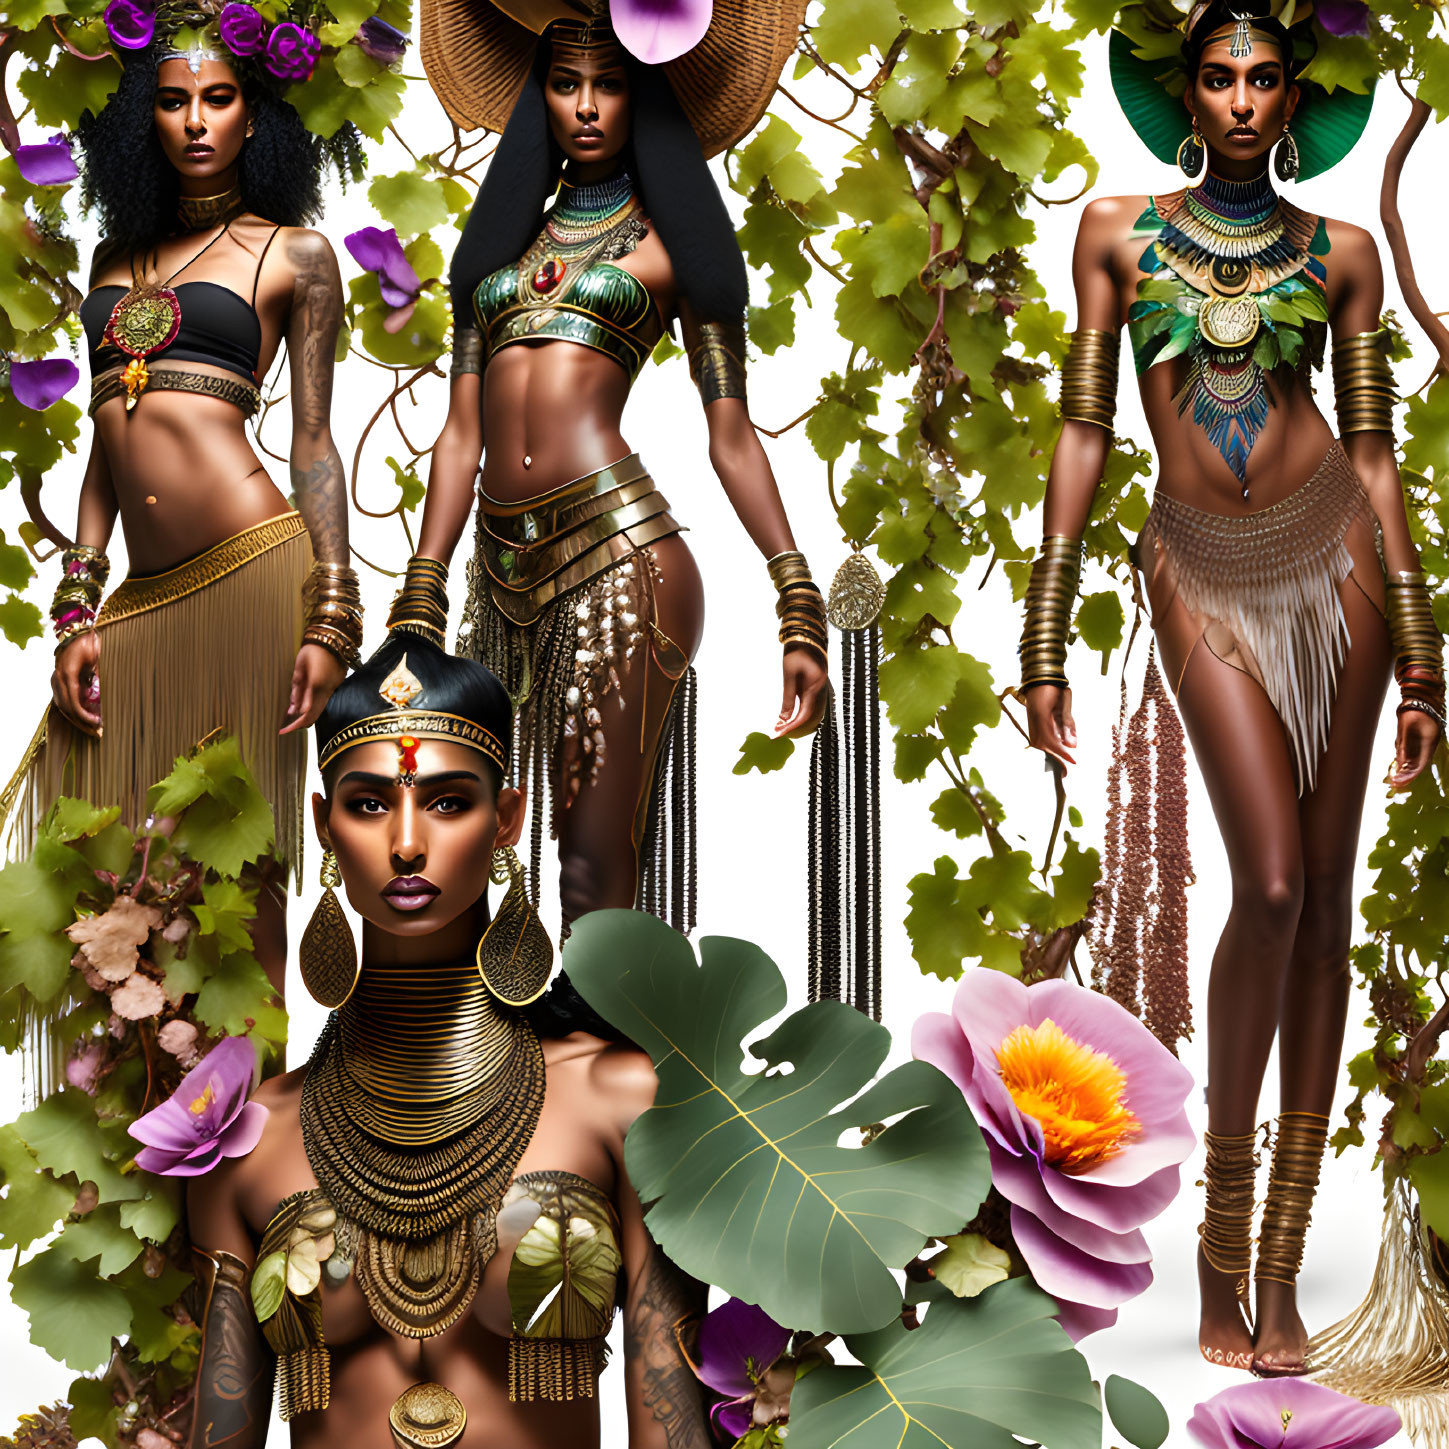 Five artistic renders of a woman in gold and green outfits with jewelry, surrounded by vines and flowers